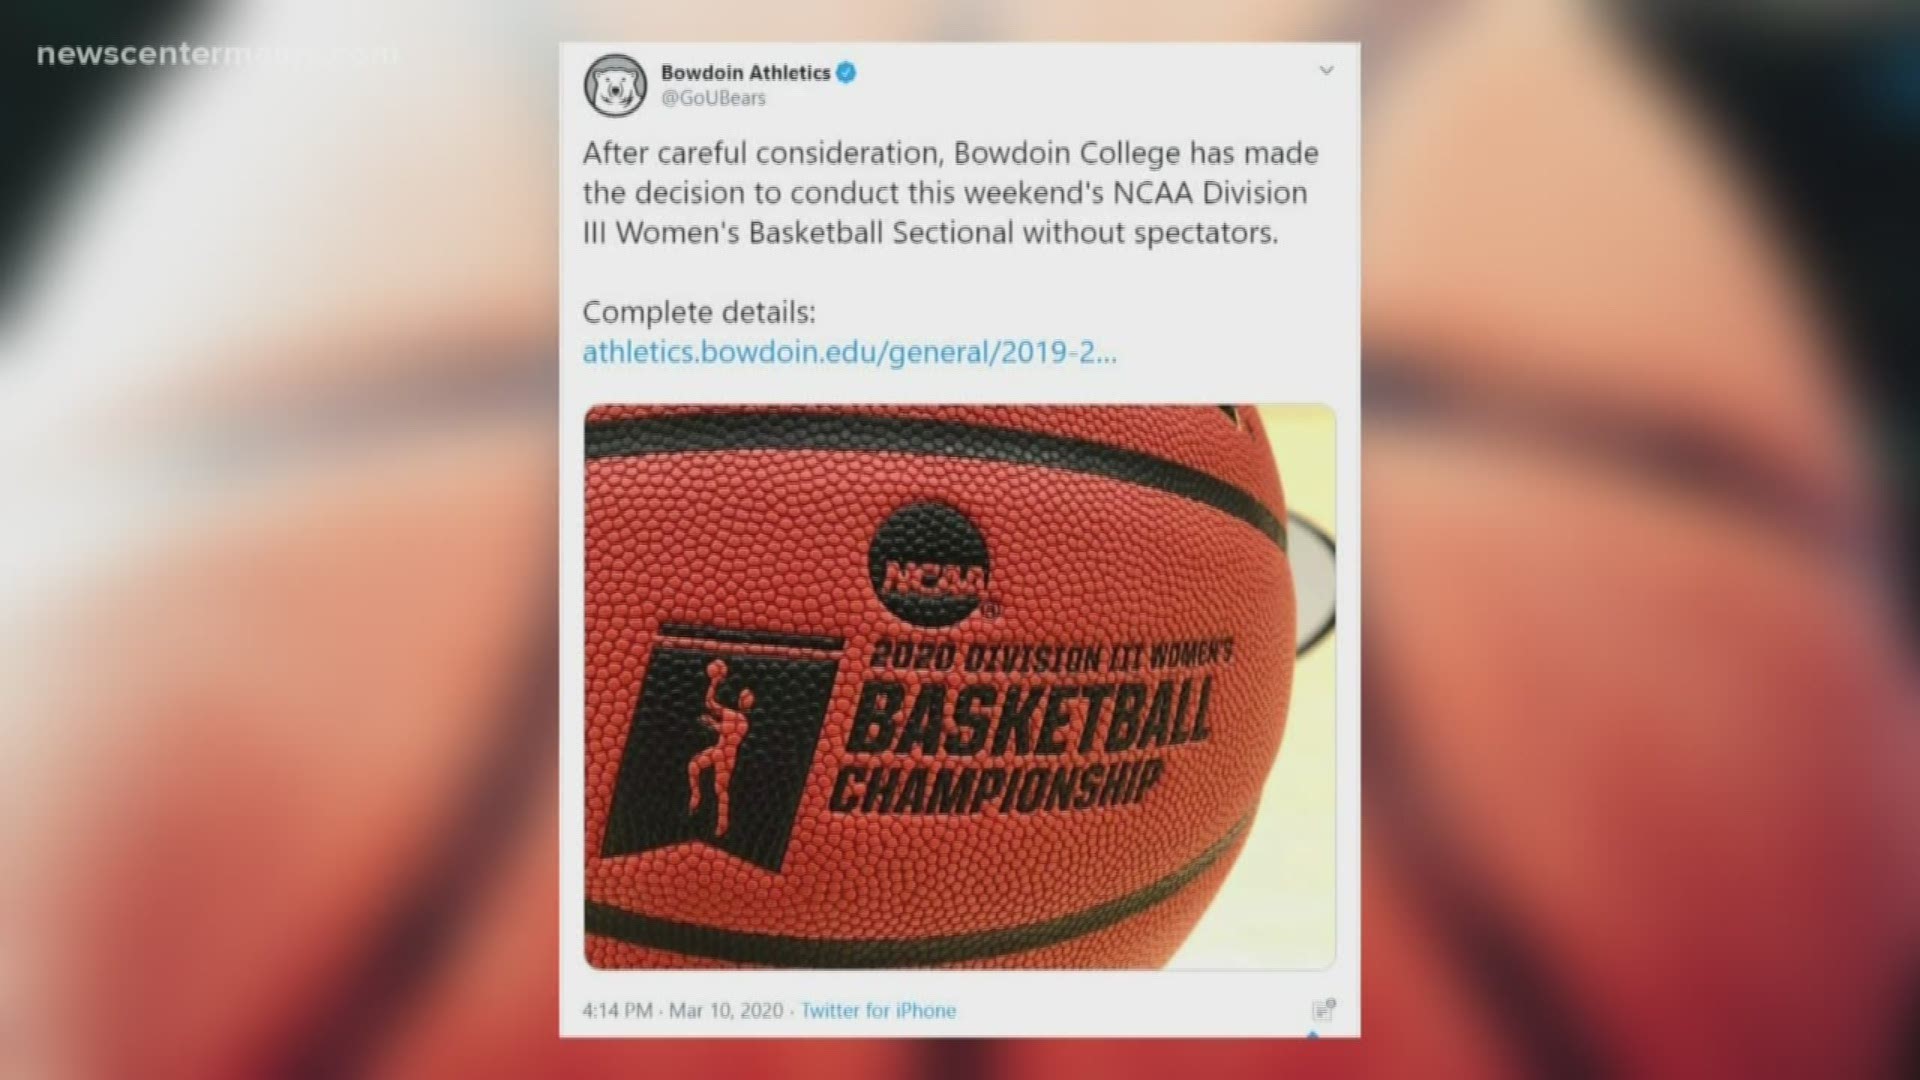 Bowdoin College says it won't allow any spectators at this weekend's NCAA Division 3 women's basketball sectional game.